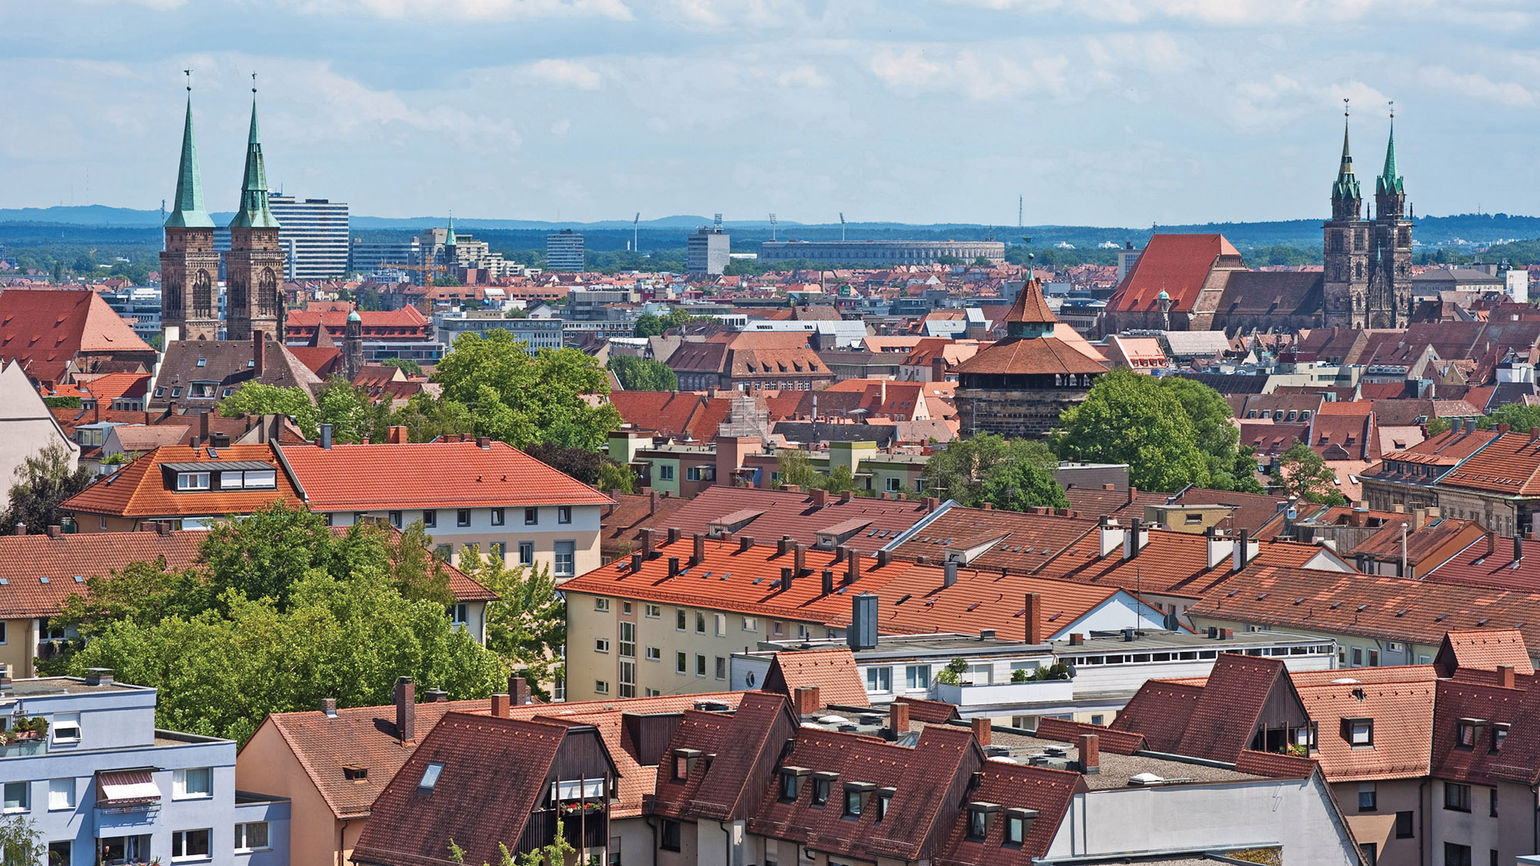 Digging into Nuremberg history and culture